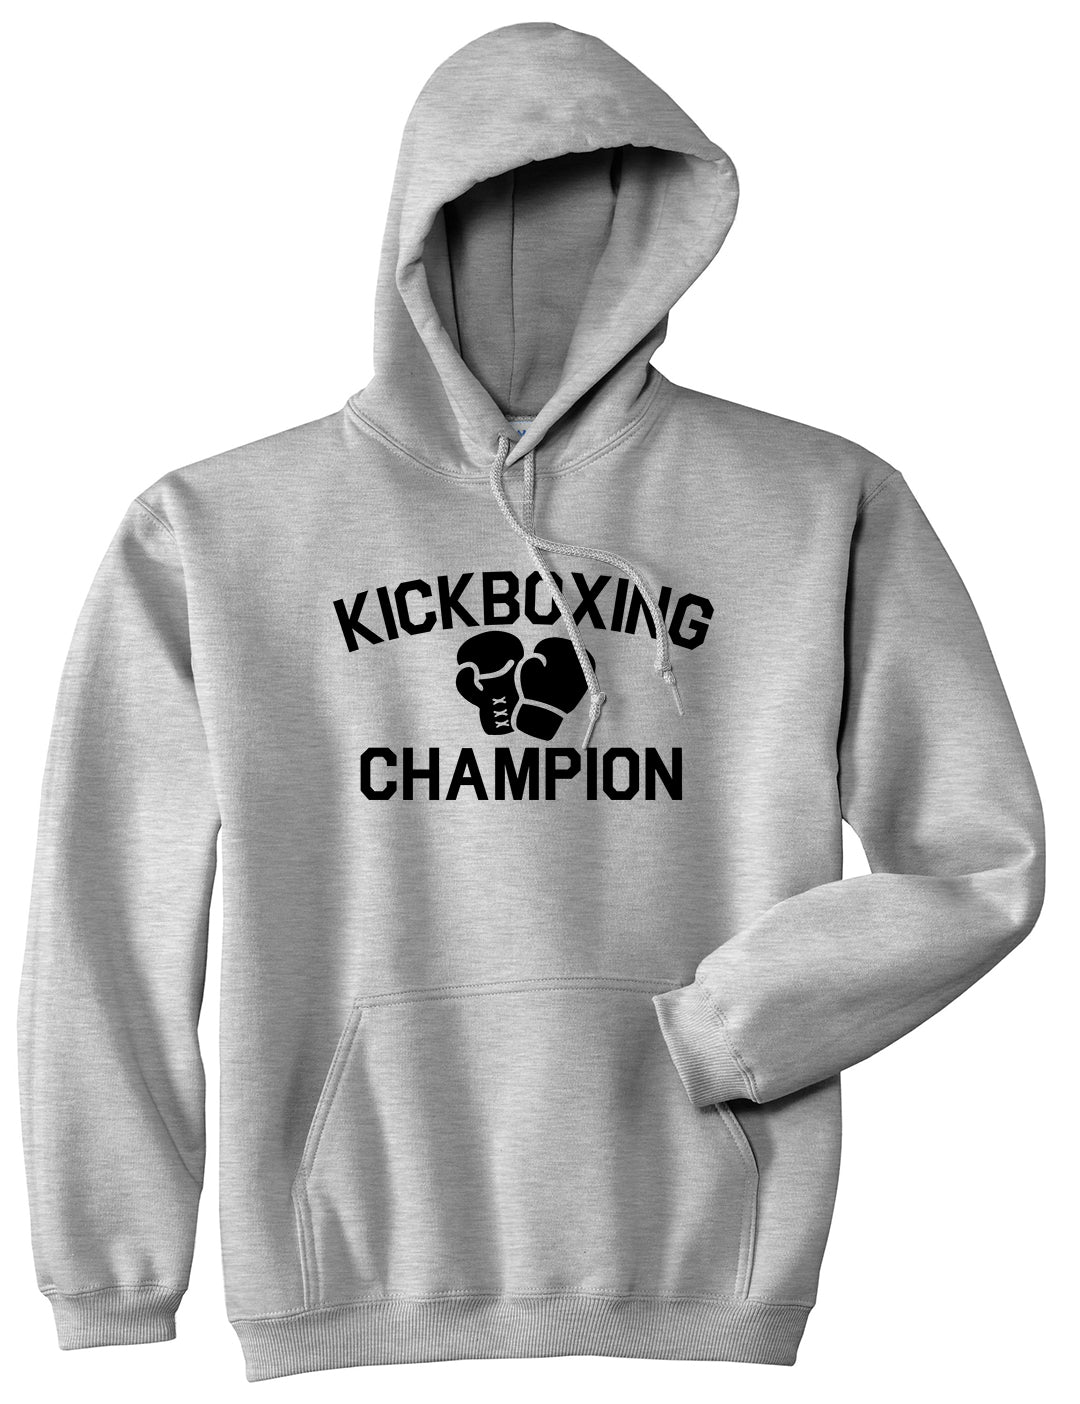 Kickboxing Champion Mens Pullover Hoodie Grey by Kings Of NY